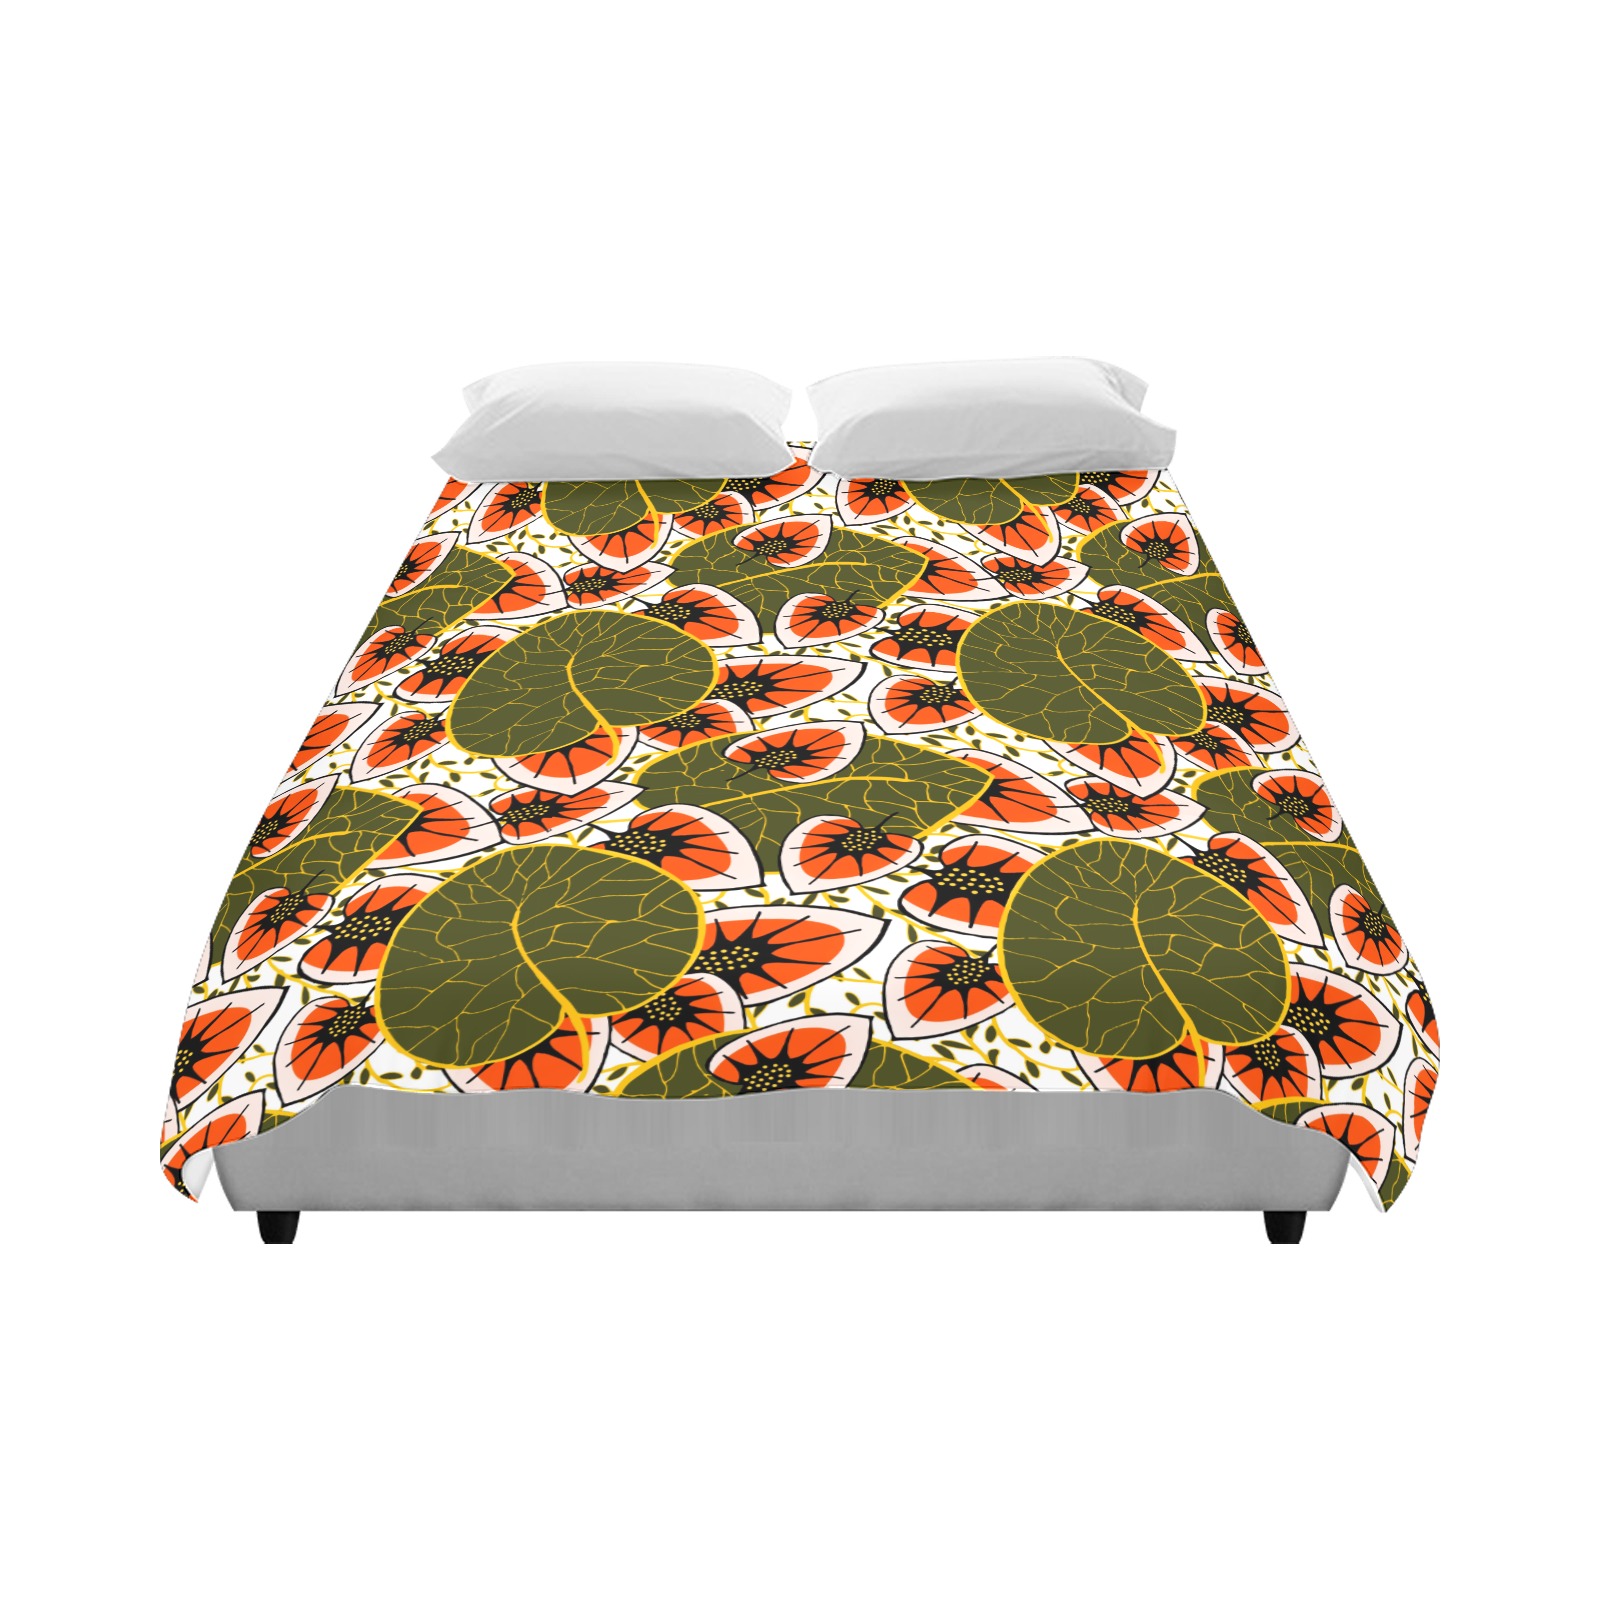 African leaves and flowers Duvet Cover 86"x70" ( All-over-print)